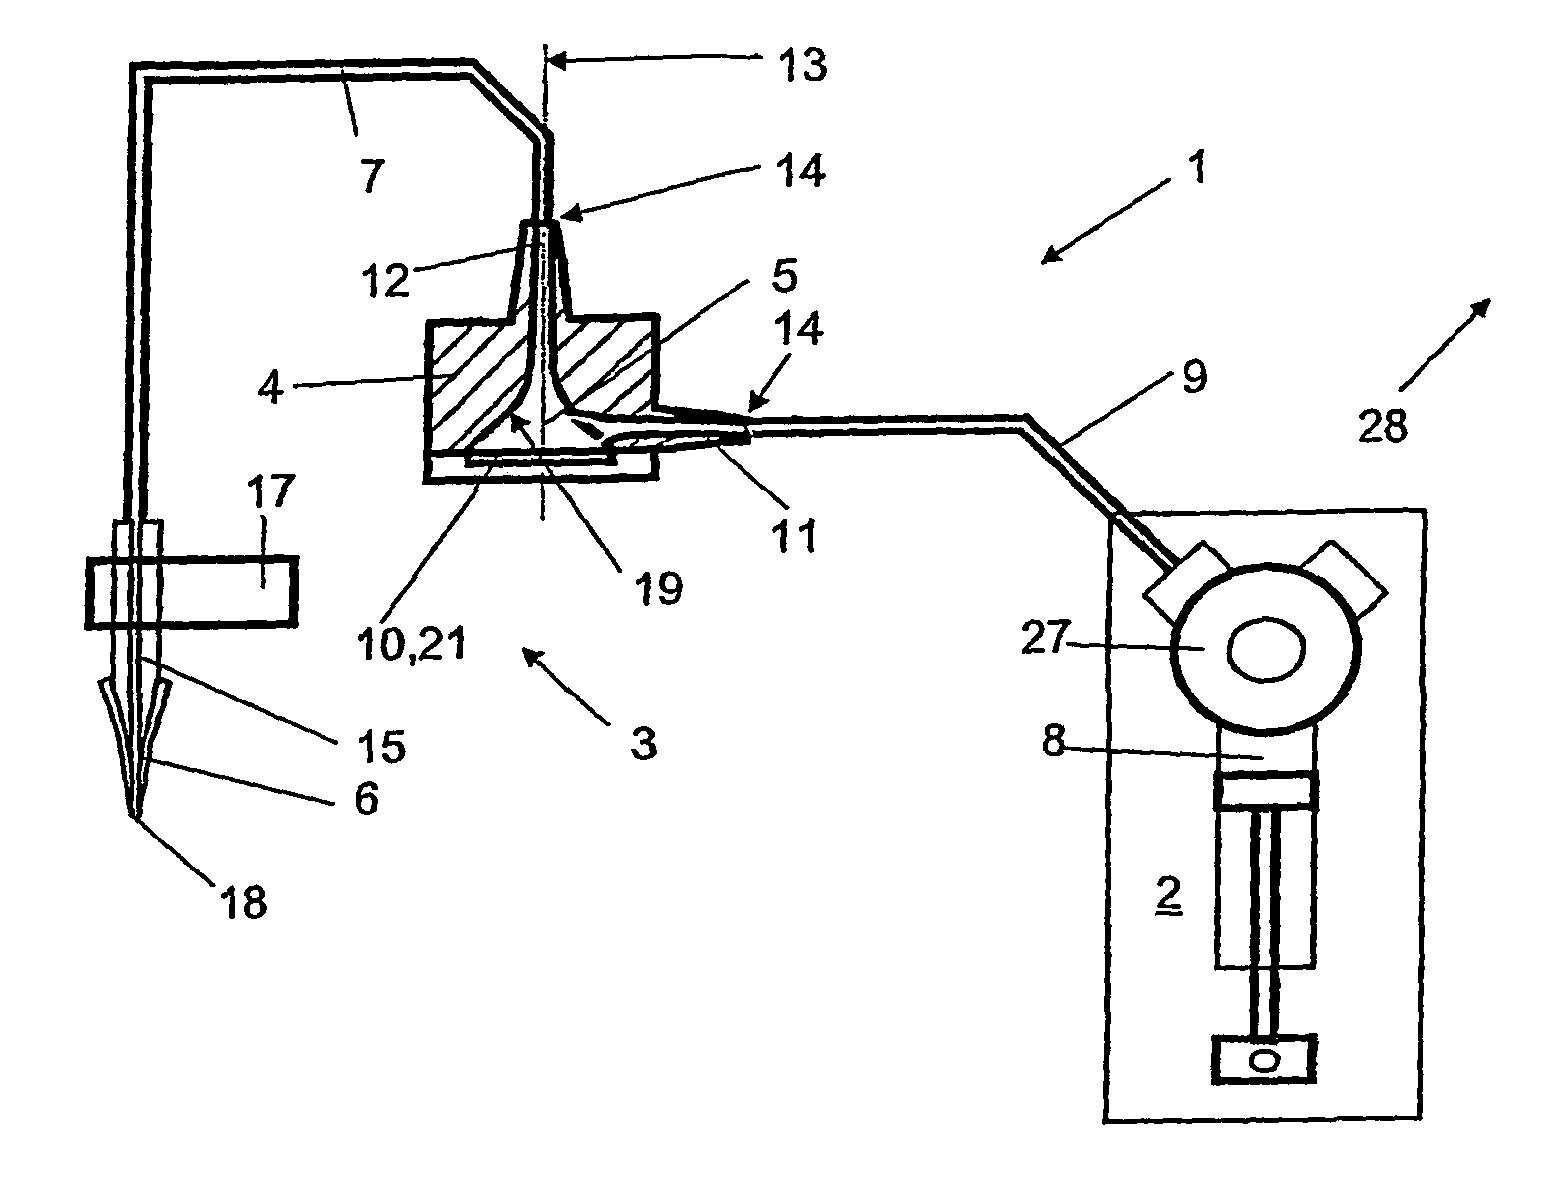 Device and system for dispensing or aspirating/dispensing liquid samples